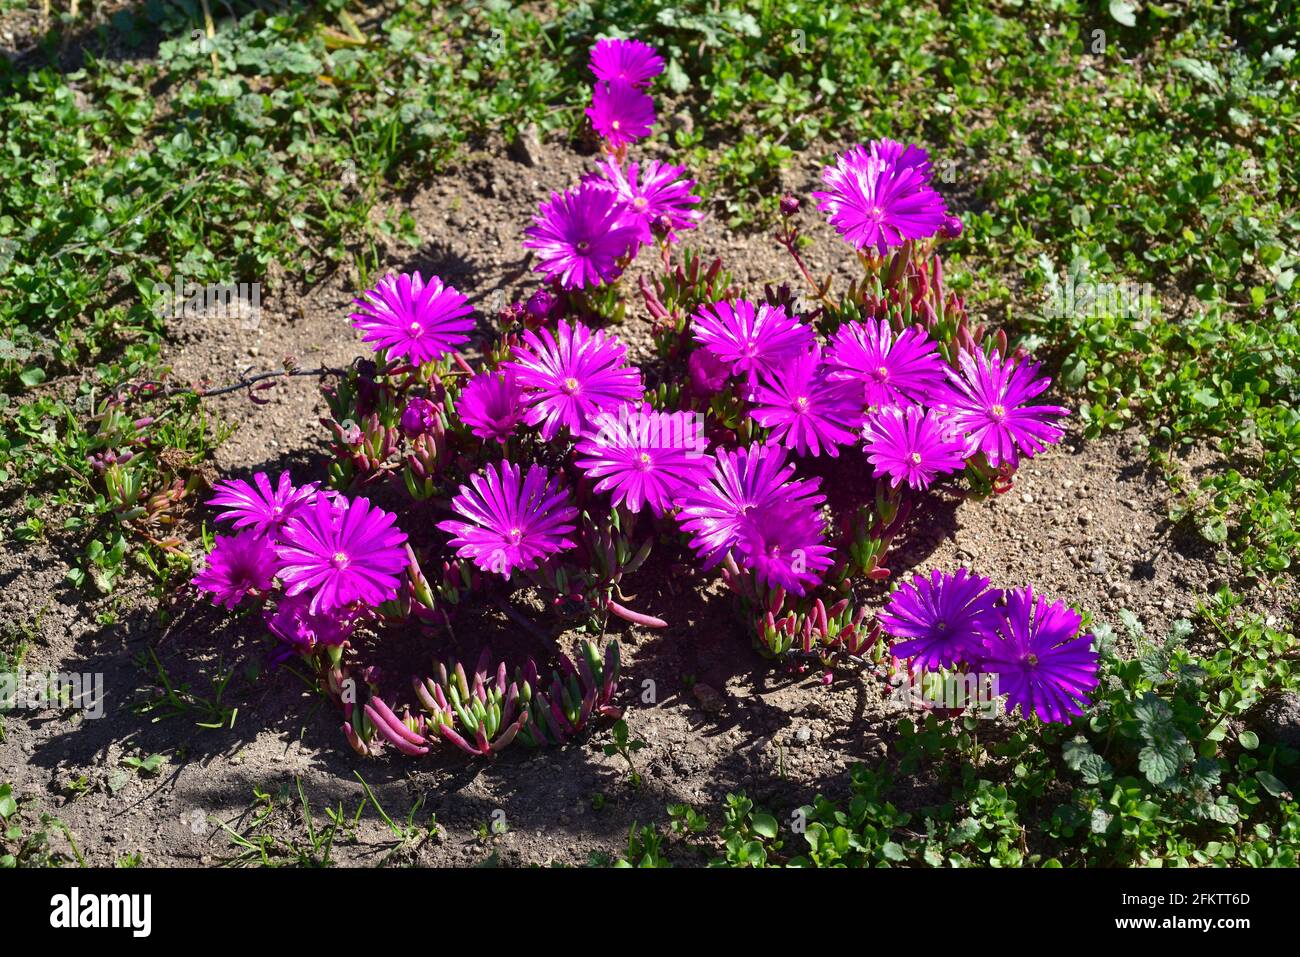 Lampranthus zeyheri is a succulent plant native to South Africa. Stock Photo